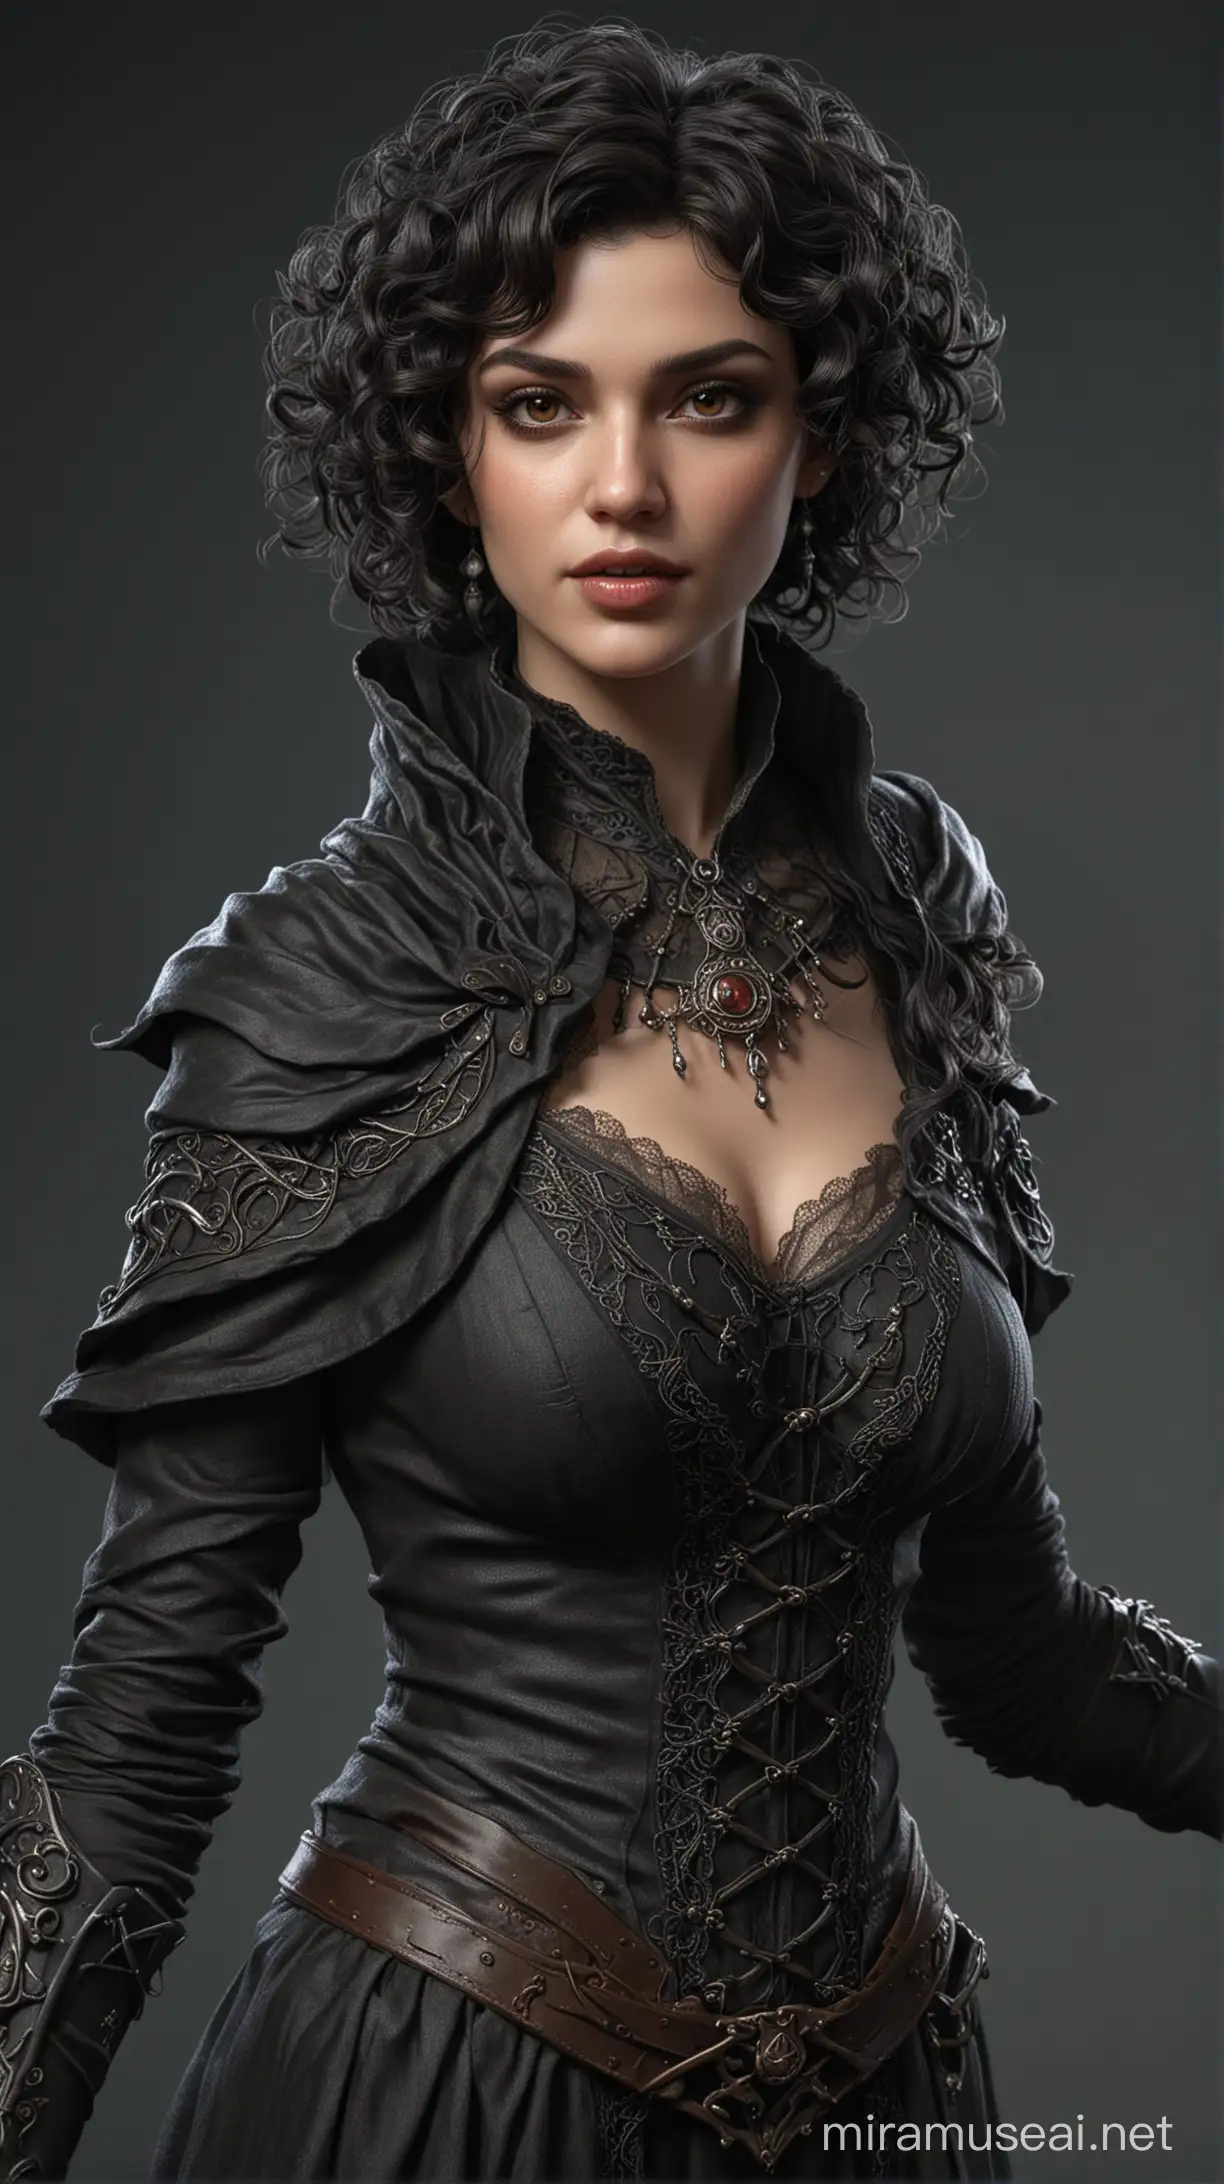 A photorealistic full-body picture of a beautiful female necromancer wizard with short black curly hair, brown eyes, big lips